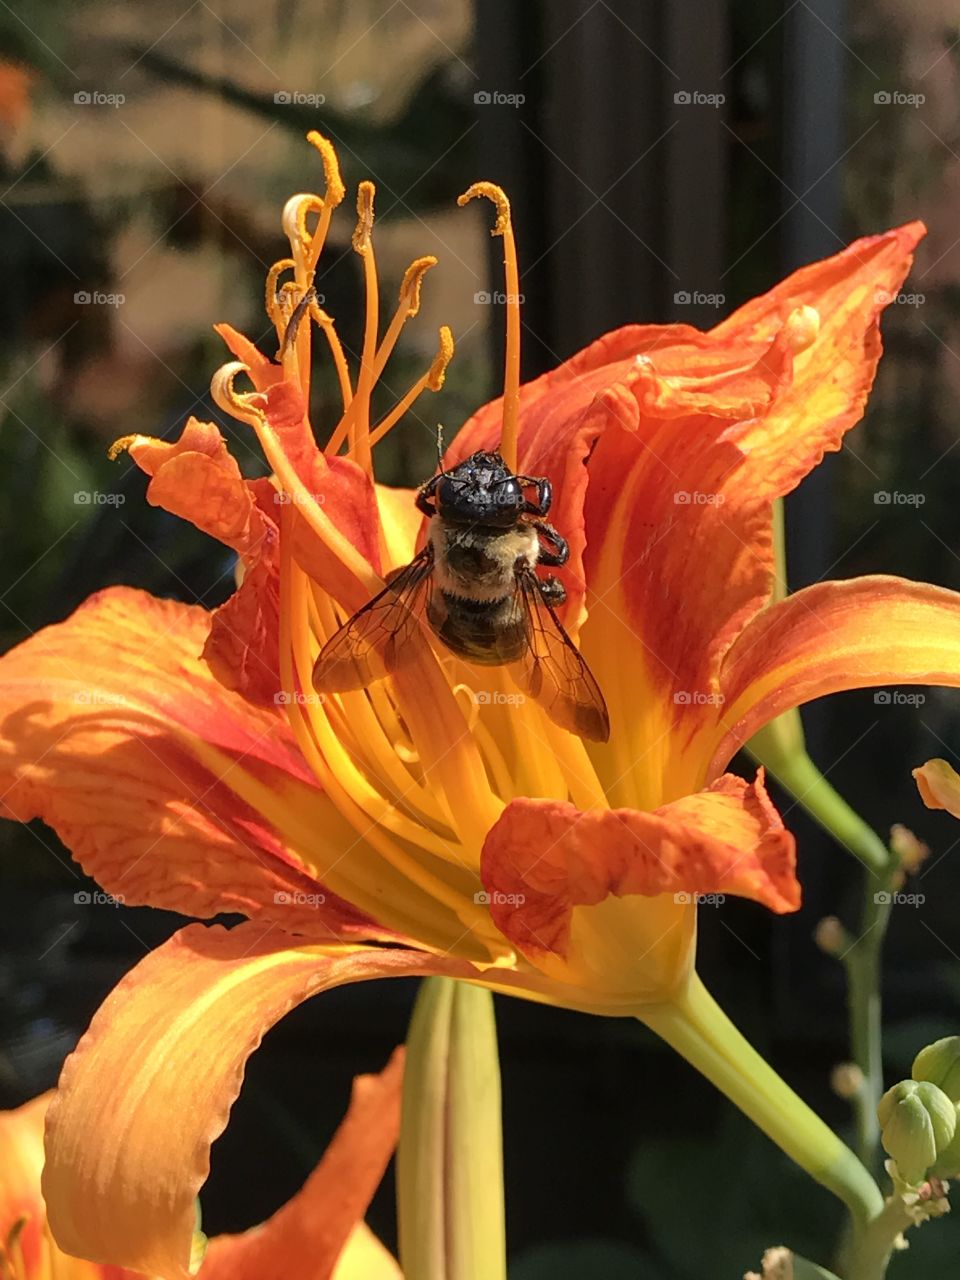 Bumble bee on orange Day Lilly 